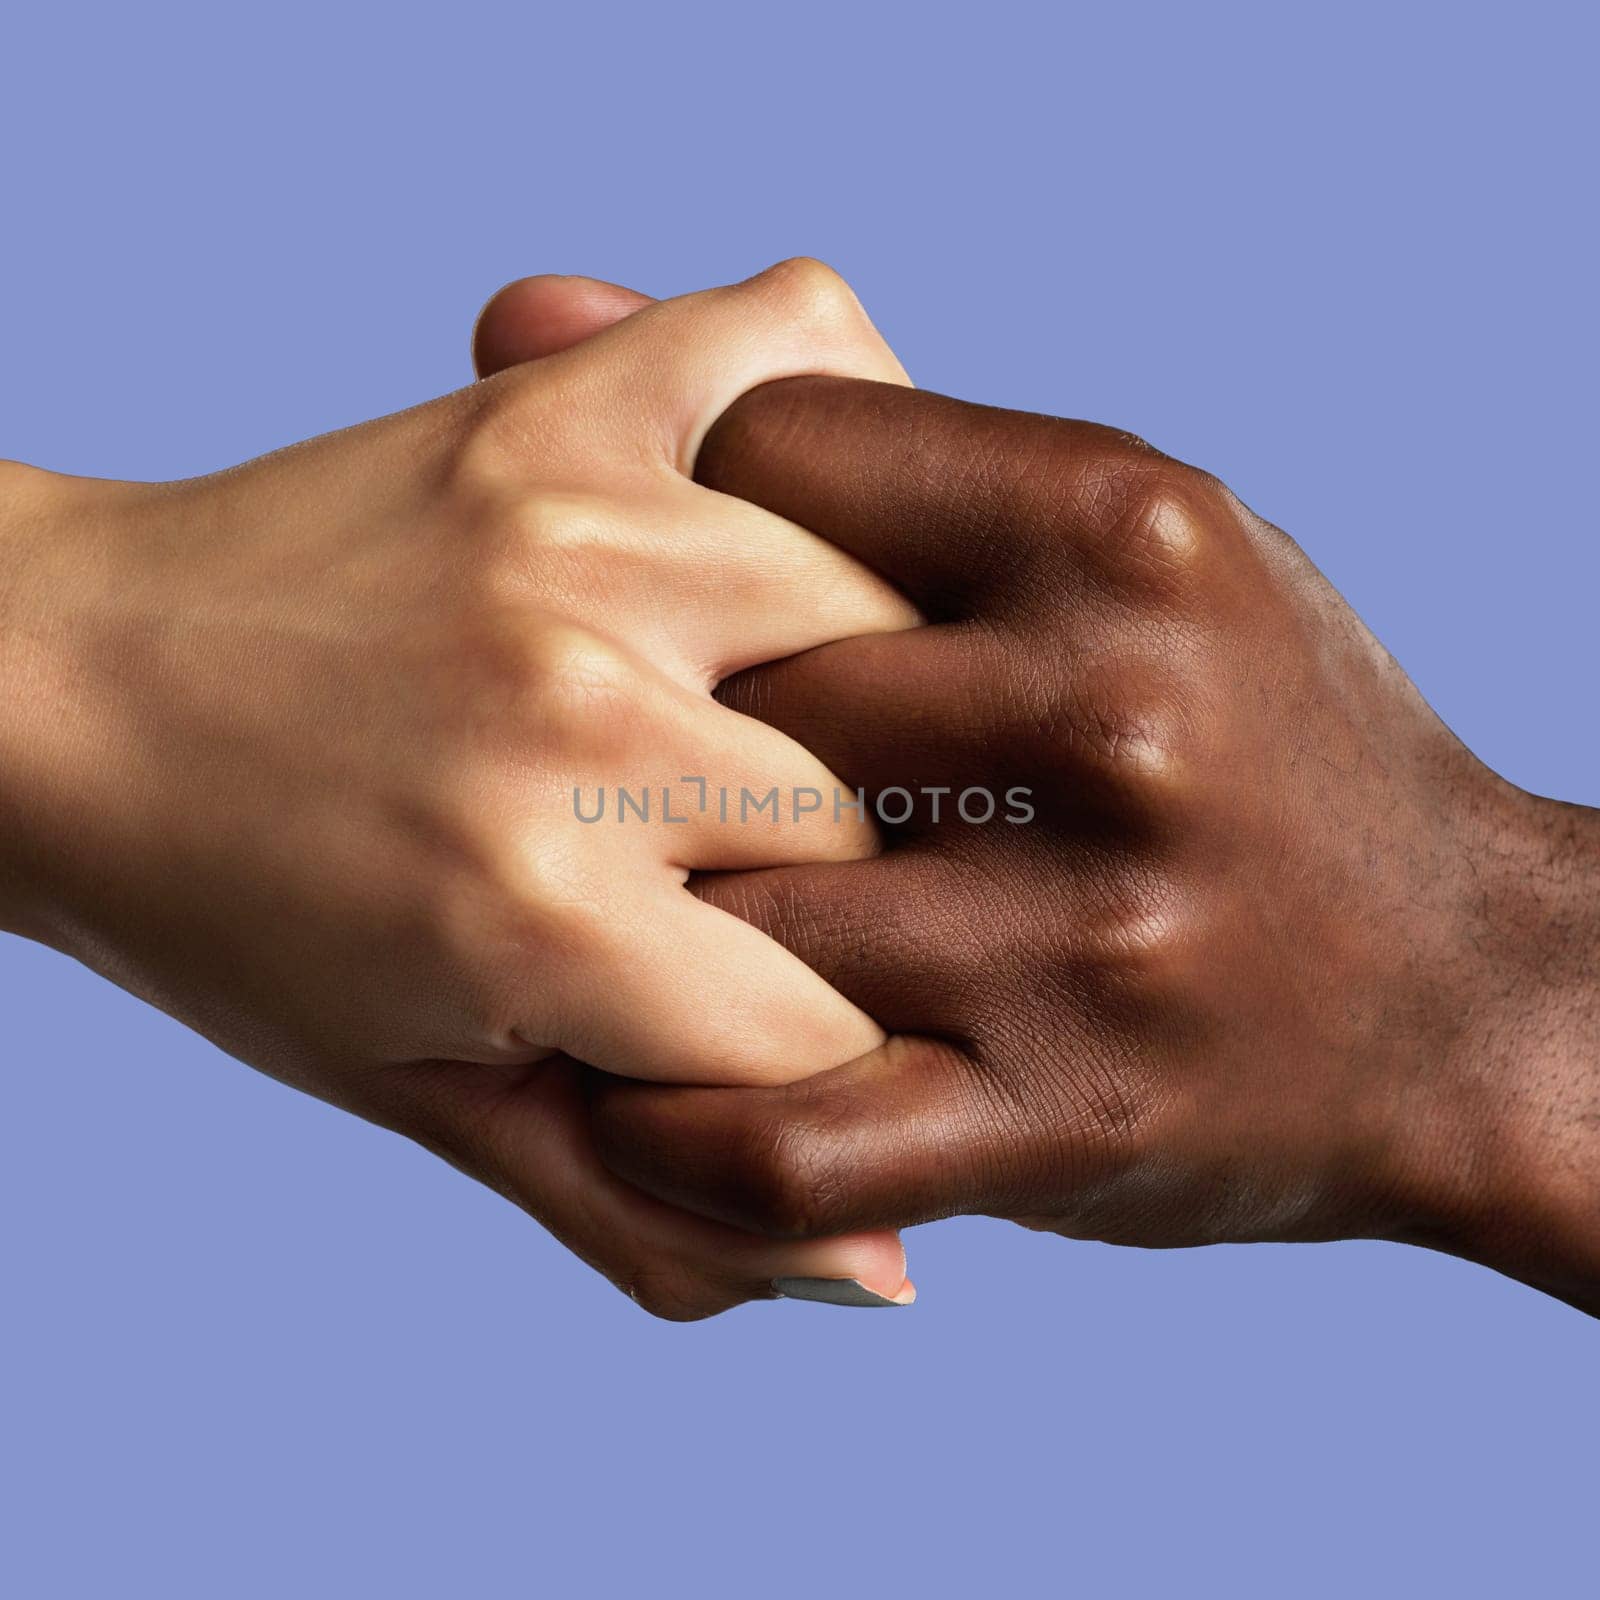 Hands, partnership and different with a collaboration of people in studio on a blue background for support. Fingers, linked and grip with friends joined together in unity, diversity or solidarity.